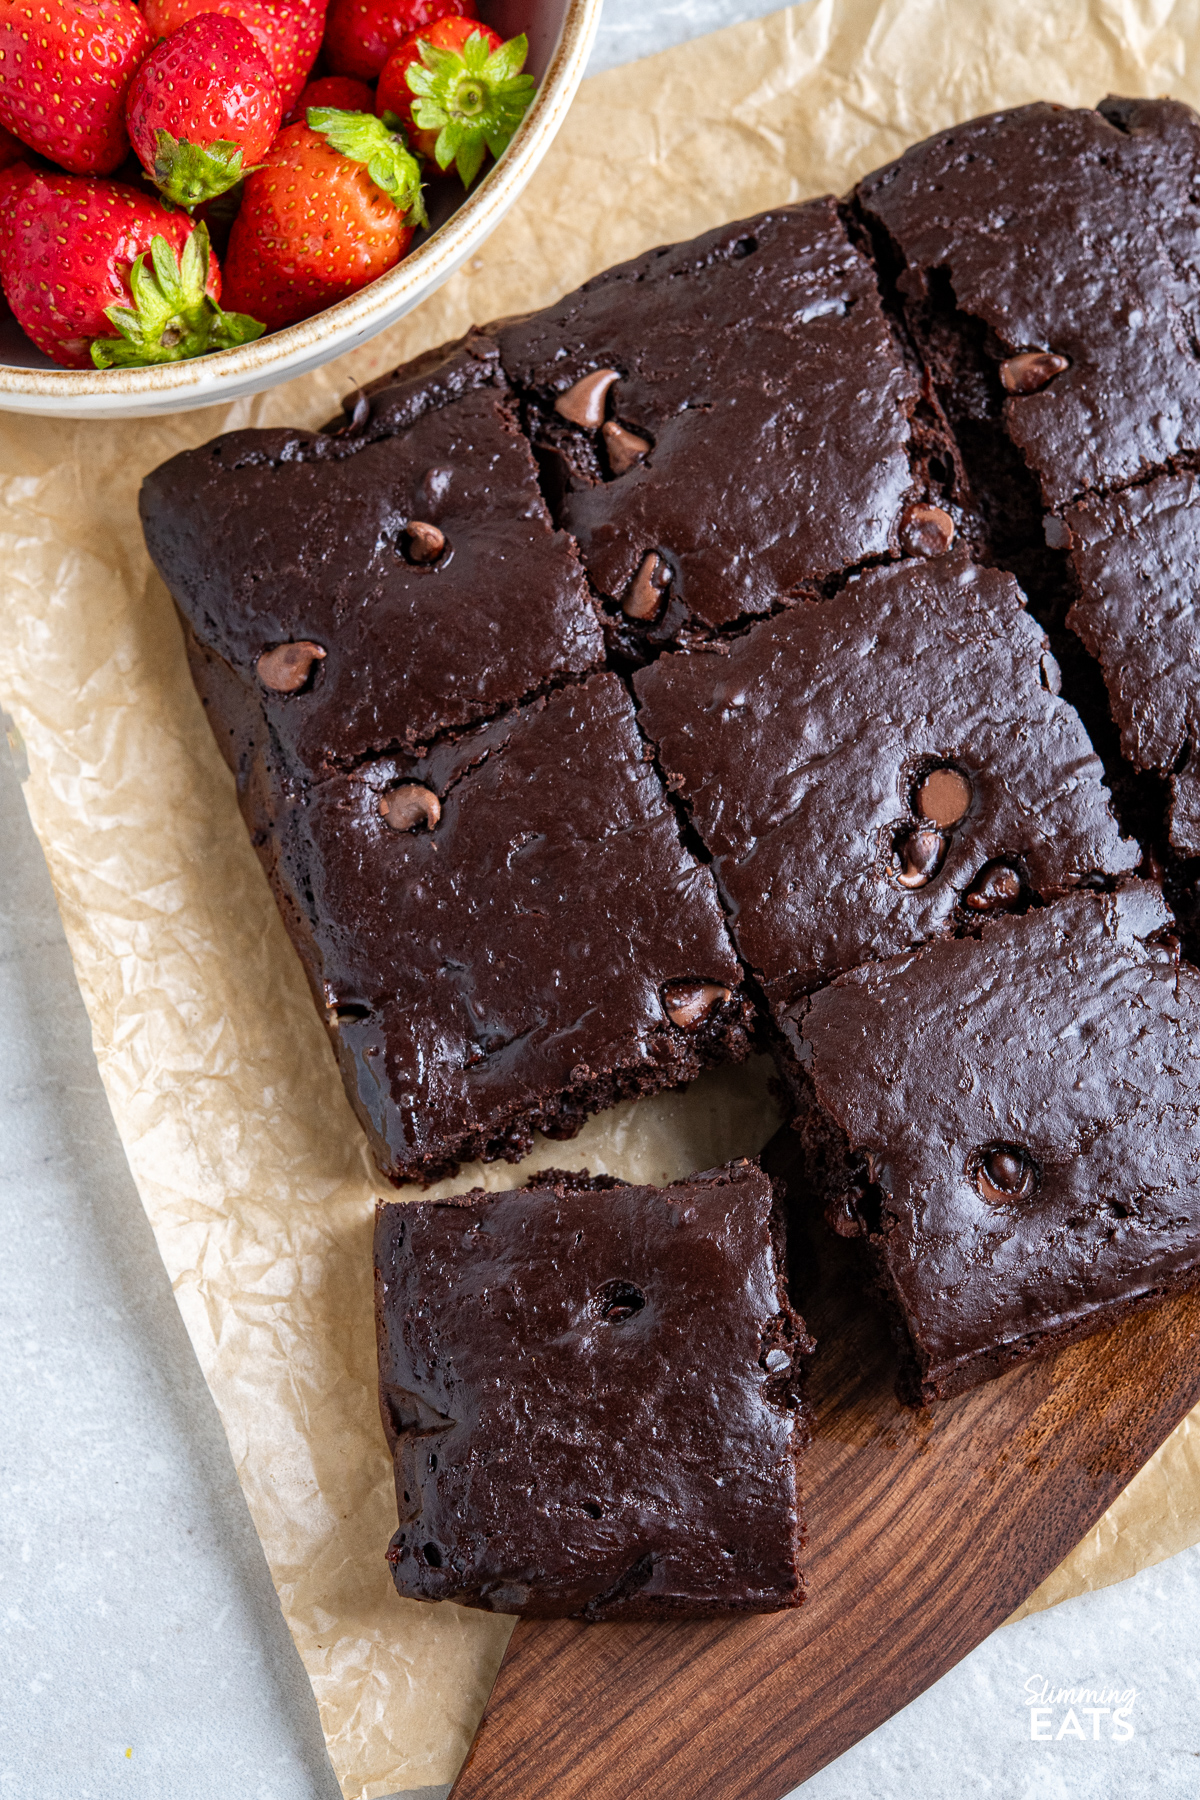 Squidgy chocolate cake cut into 9 squares on parchment paper, with one slice being lifted by a spatula. A bowl of fresh strawberries sits in the background.